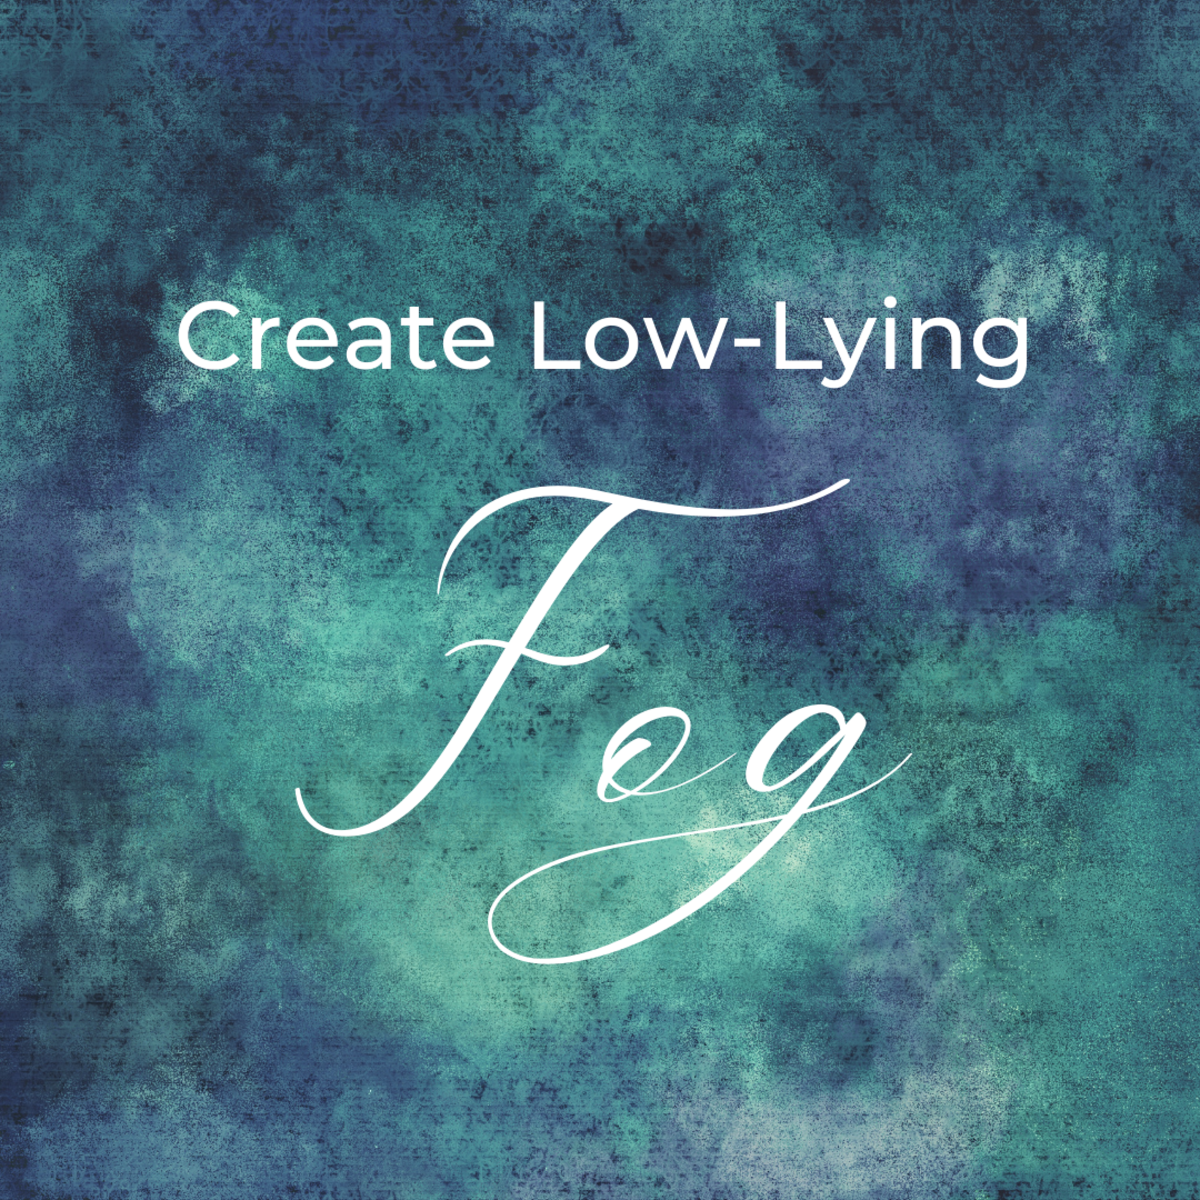 Creating ground fog with a fog machine is tricky, but there are some strategies you can use to ensure a good effect.